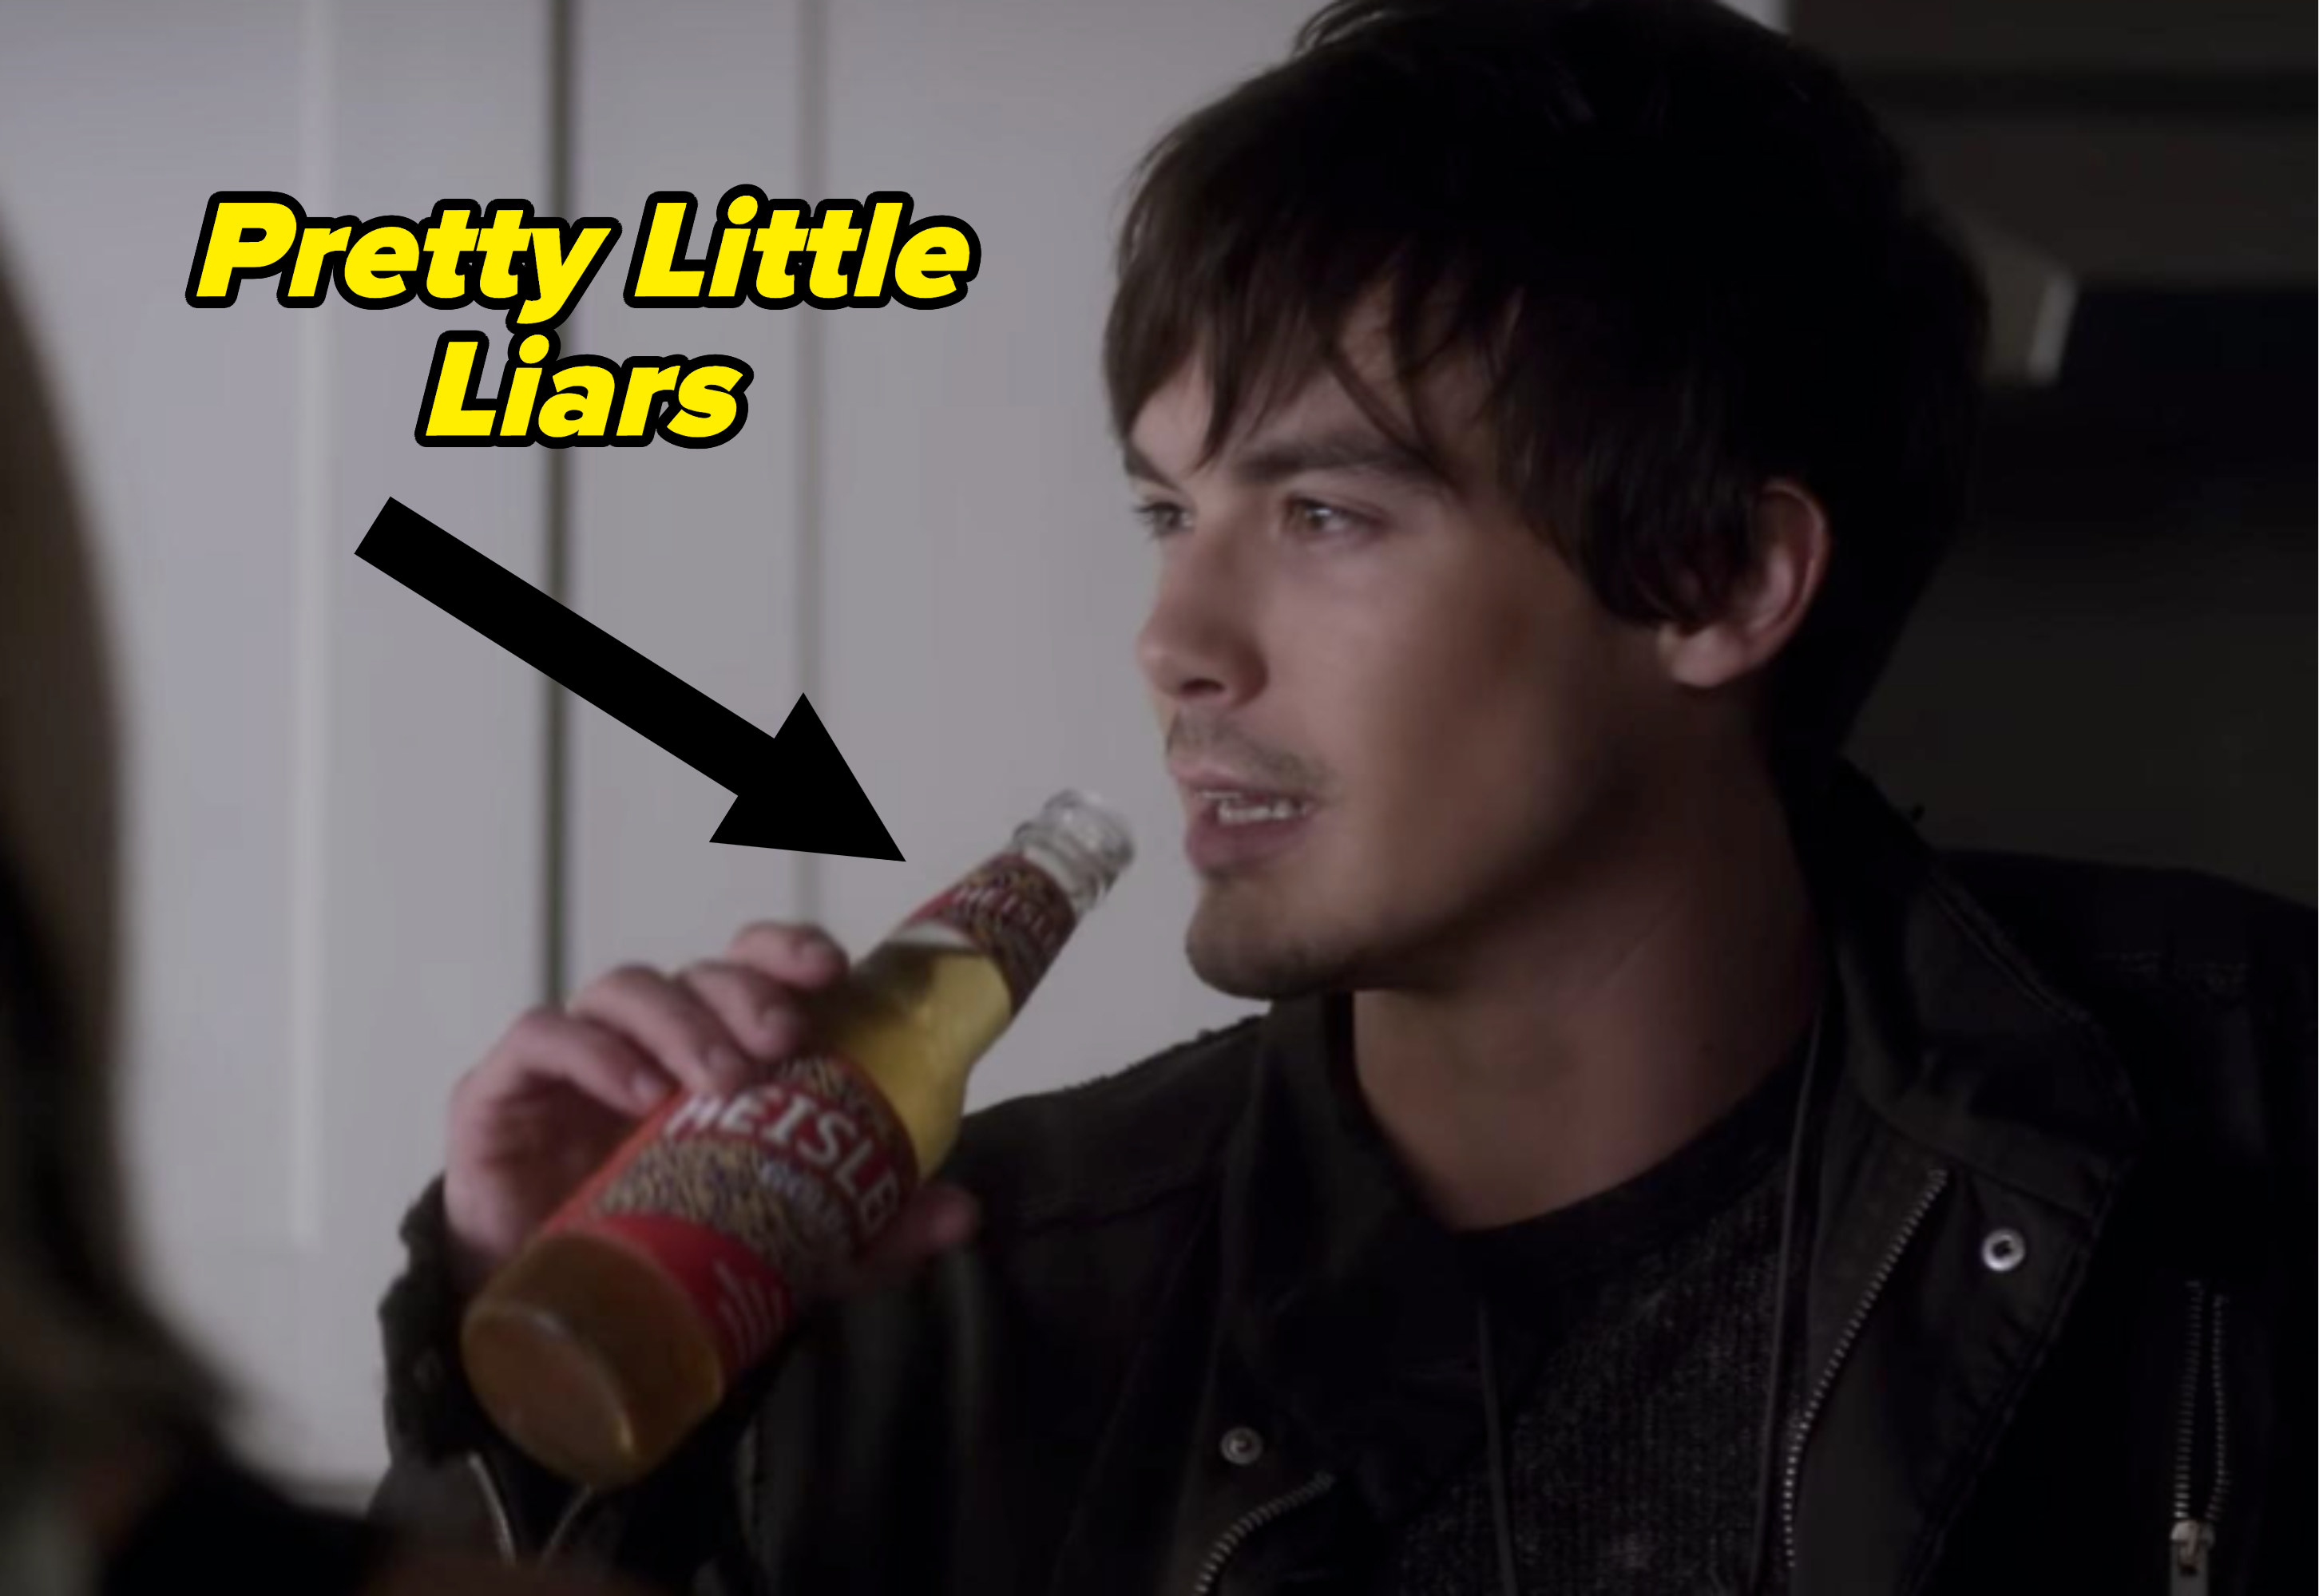 character drinking the beer in pretty little liars